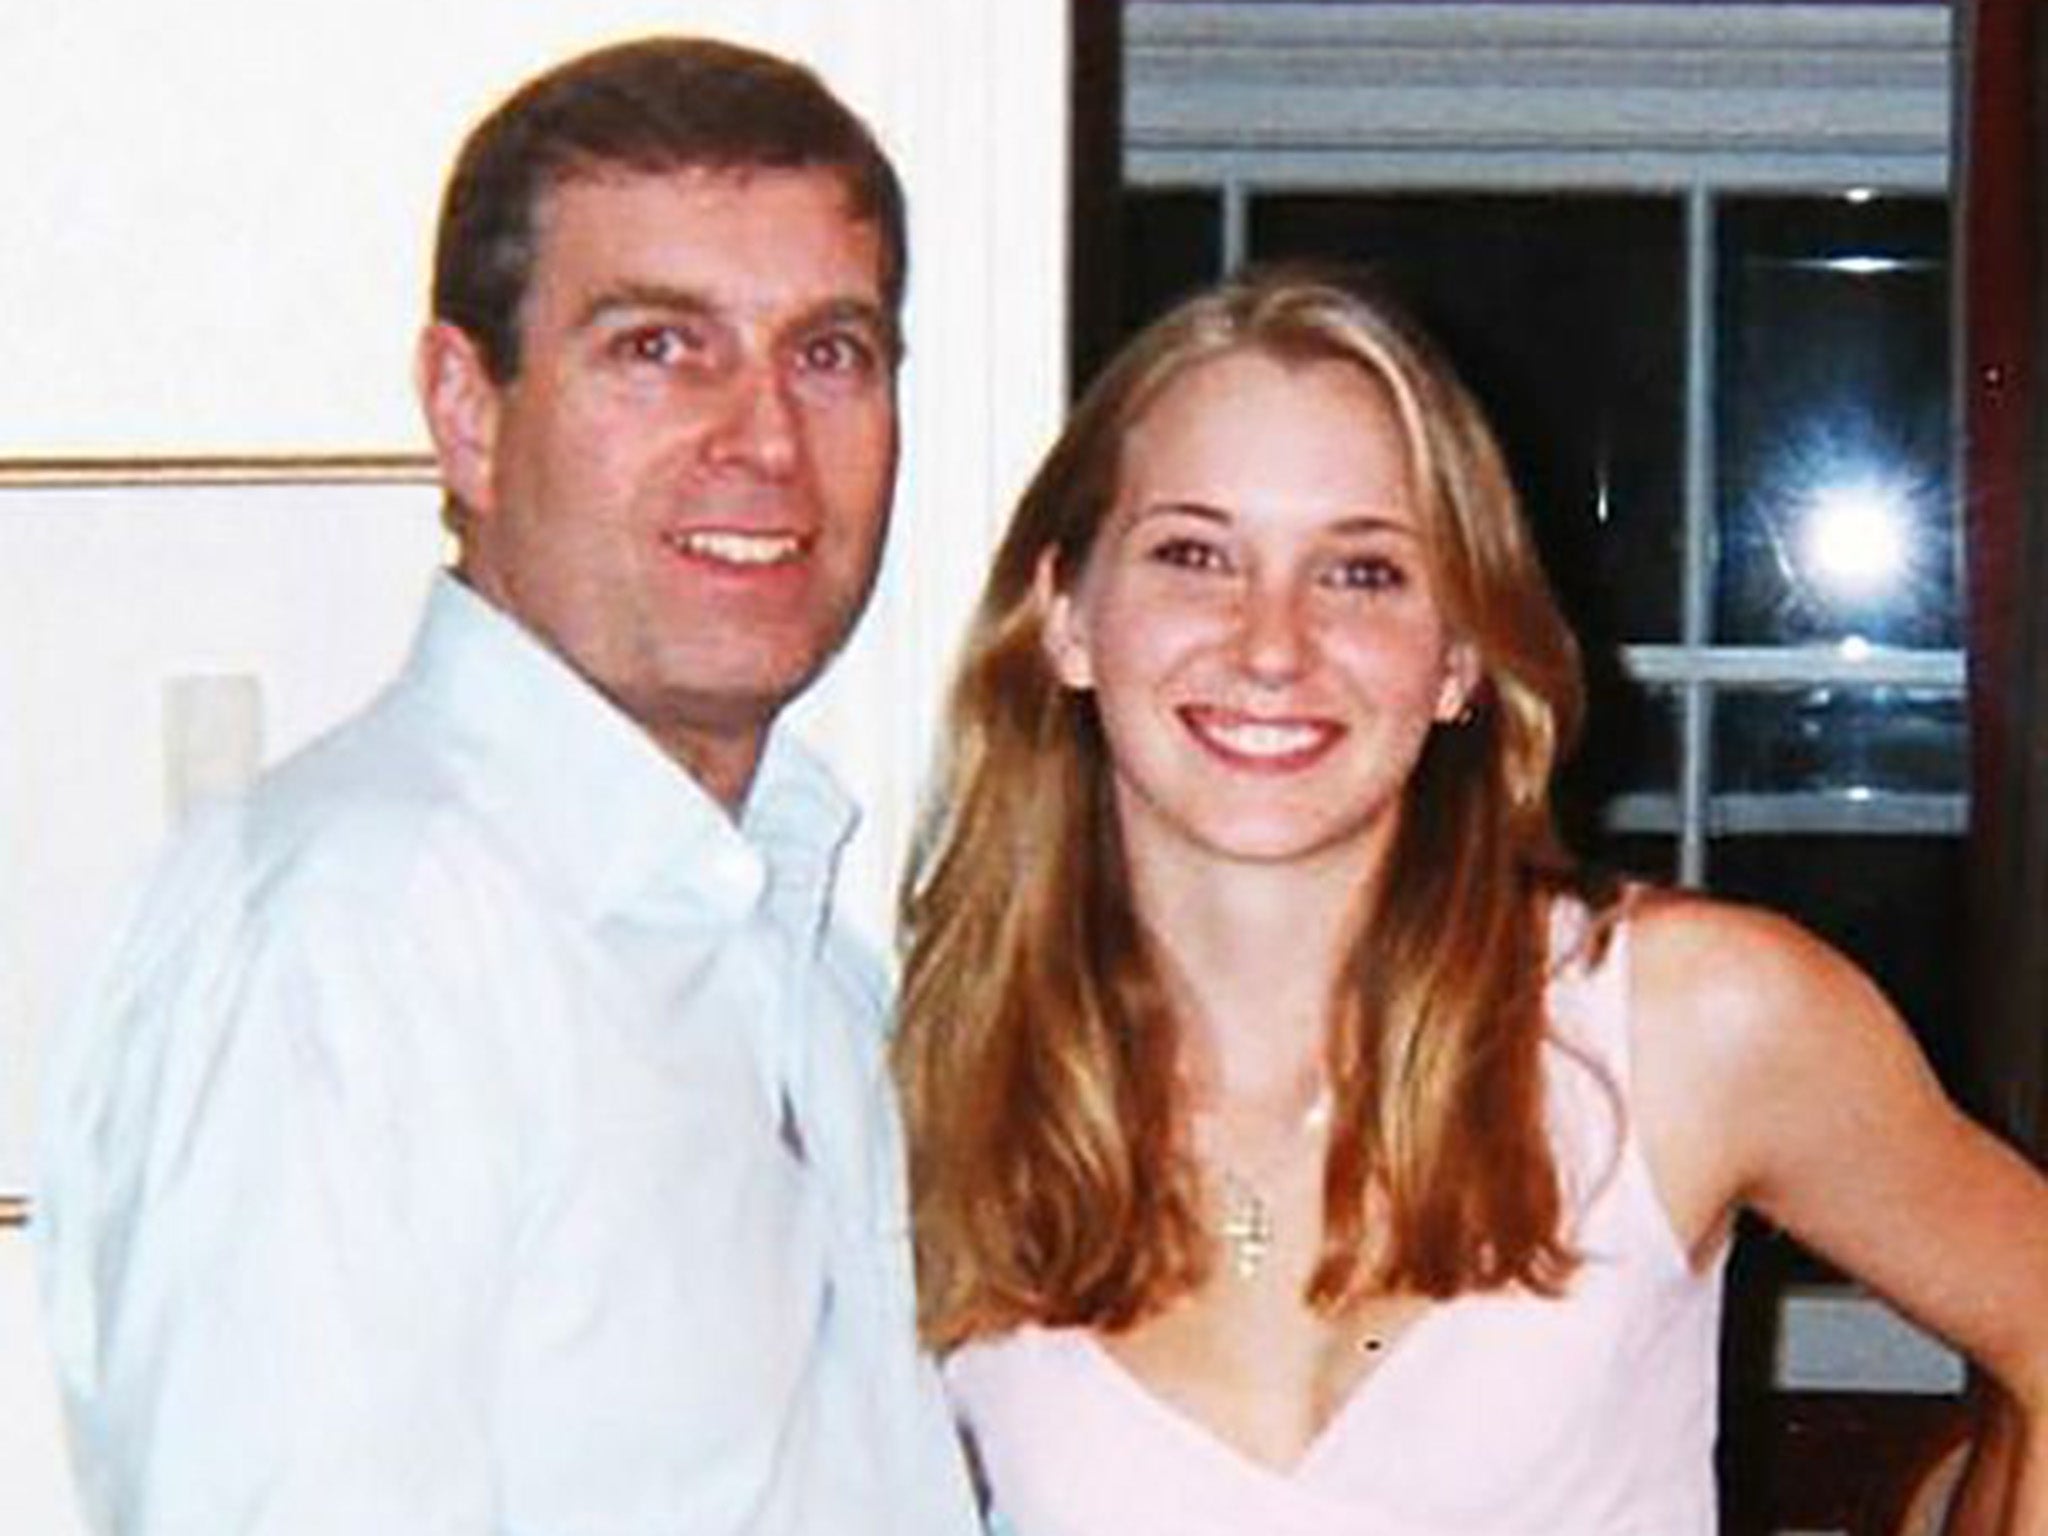 Virginia Giuffre told me she had sex with Prince Andrew, claims Maxwell witness The Independent